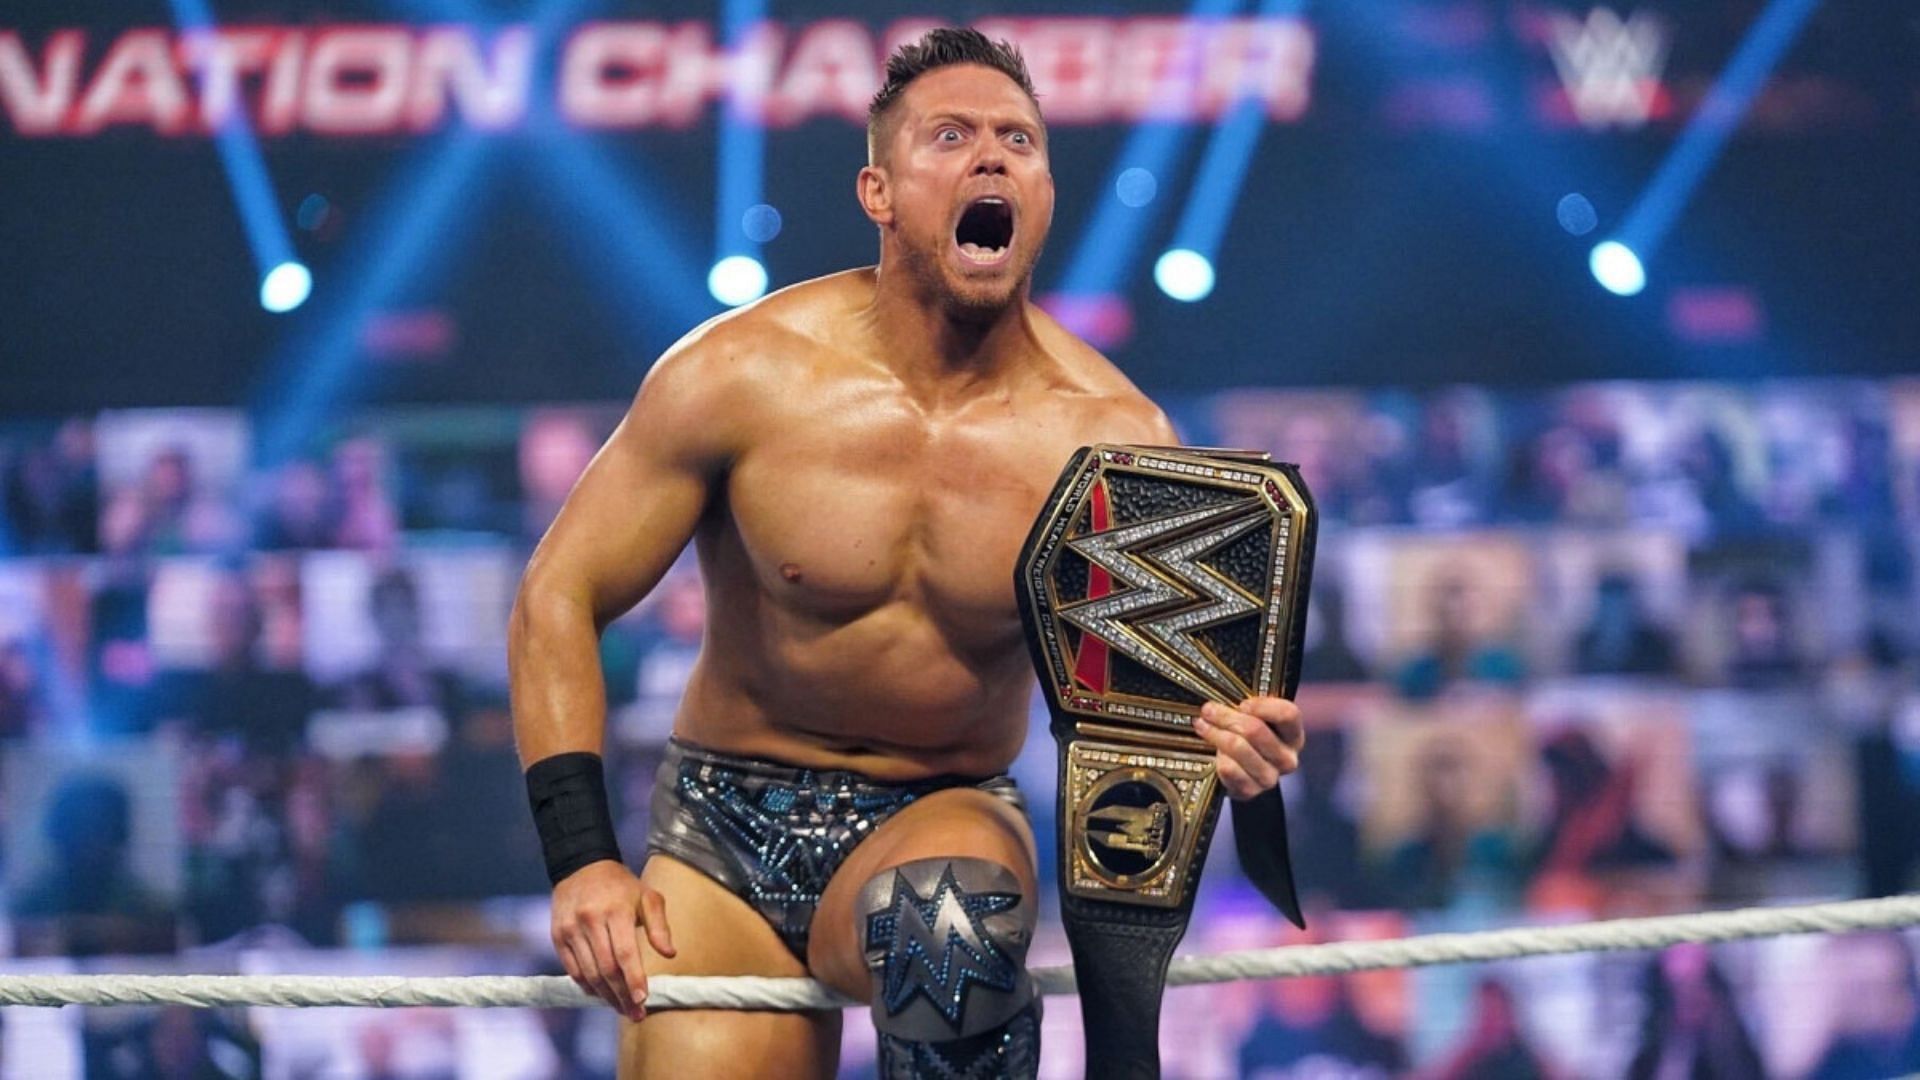 The Miz is a two-time WWE Champion